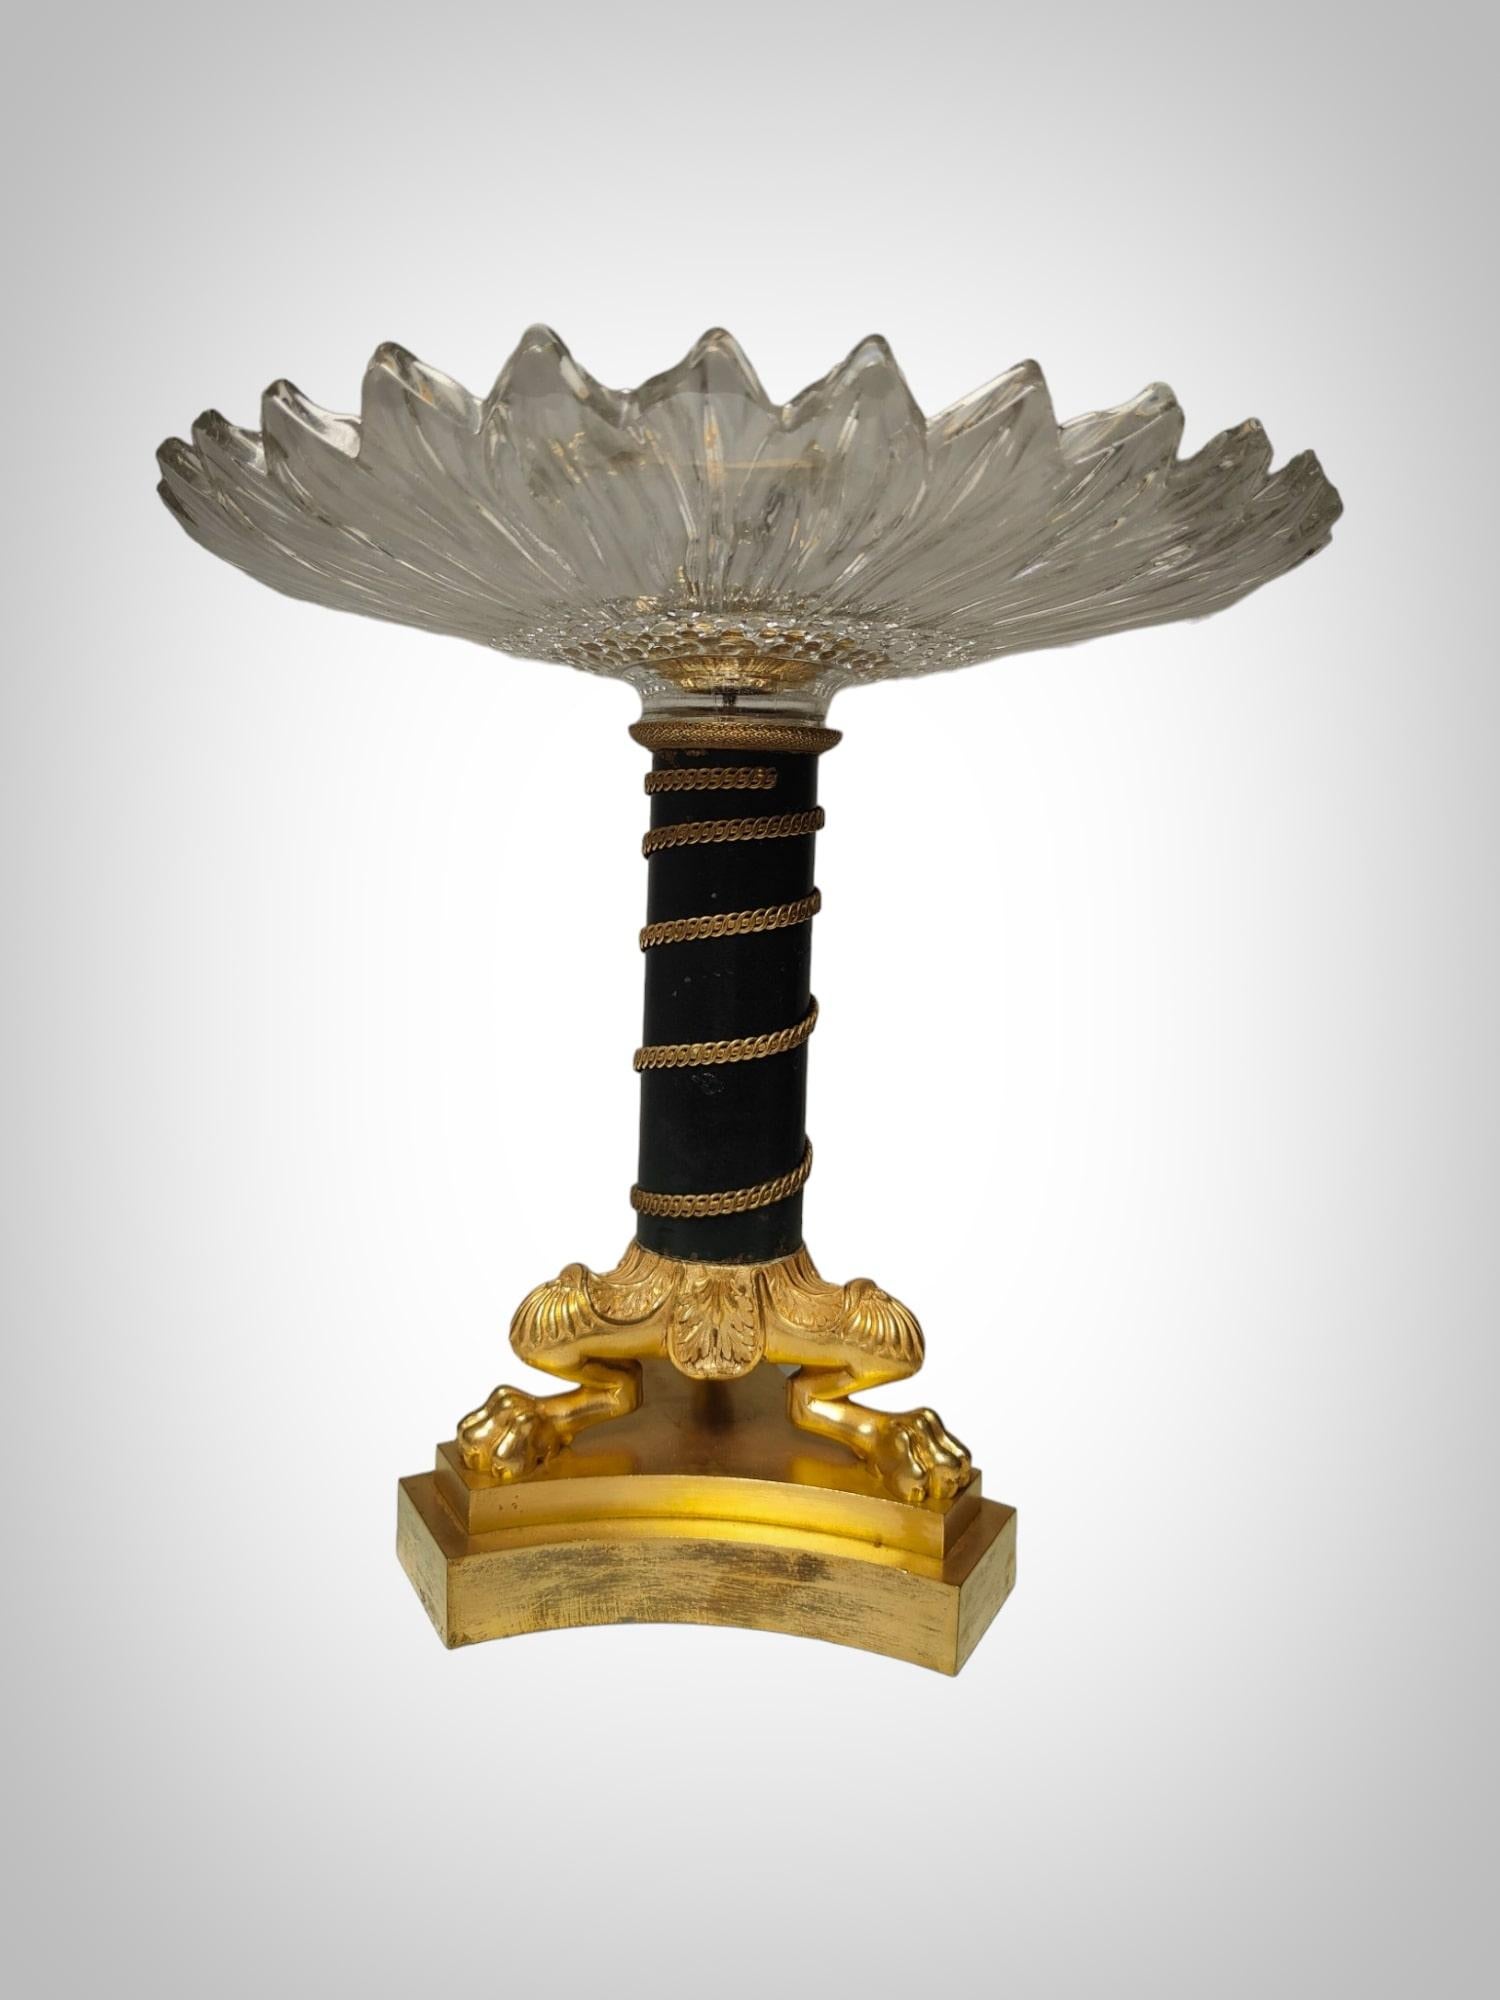 This exquisite centerpiece is a testament to the fine craftsmanship of 19th-century France. Crafted from gilded bronze and crystal, it exudes an air of timeless sophistication. The delicate interplay between the lustrous bronze and pristine crystal